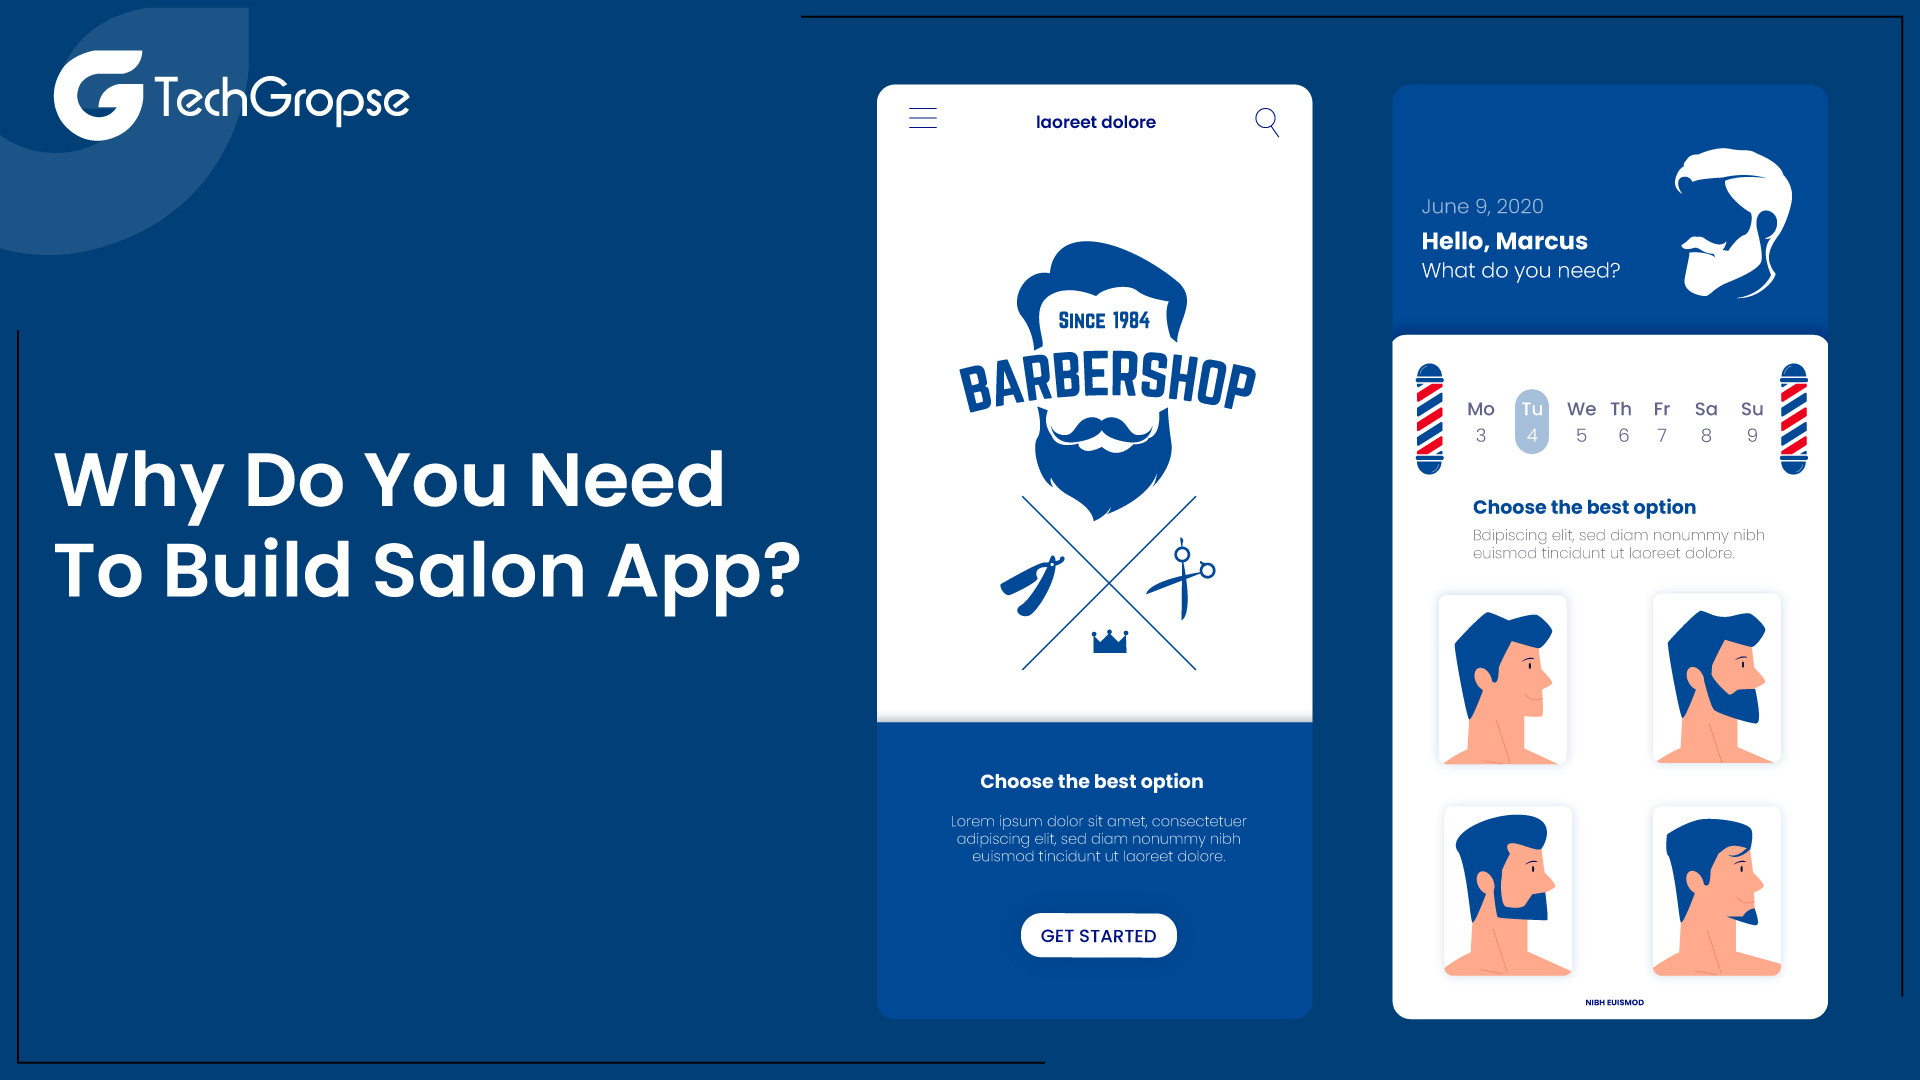 Why do You Need to Build Salon App?